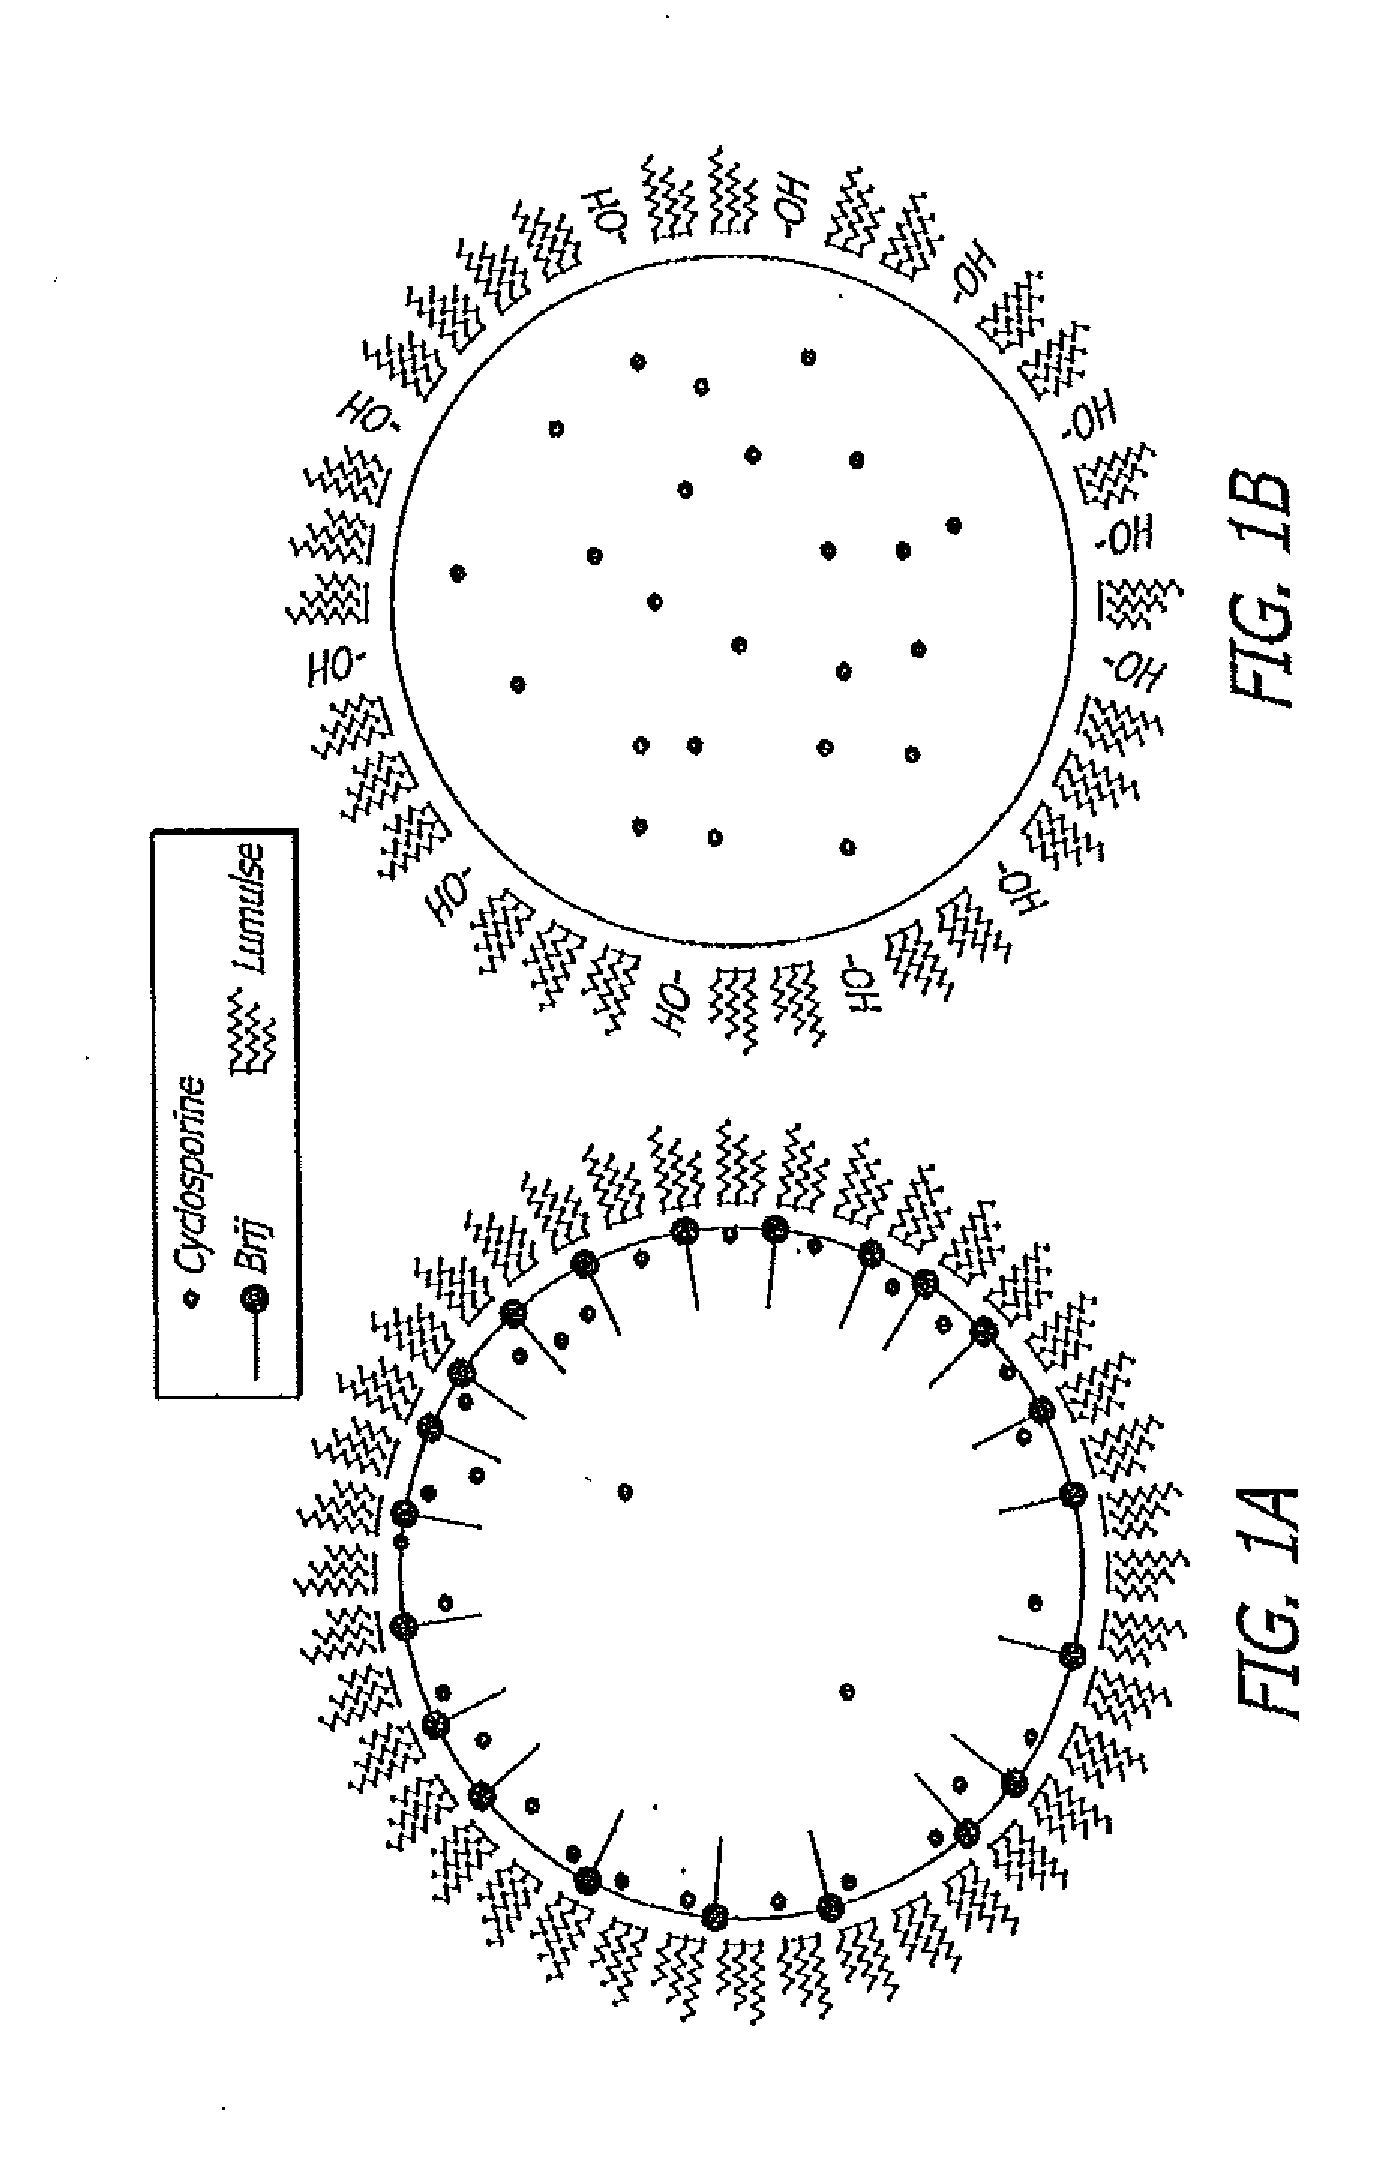 Stable cyclosporine containing ophthalmic emulsion for treating dry eyes